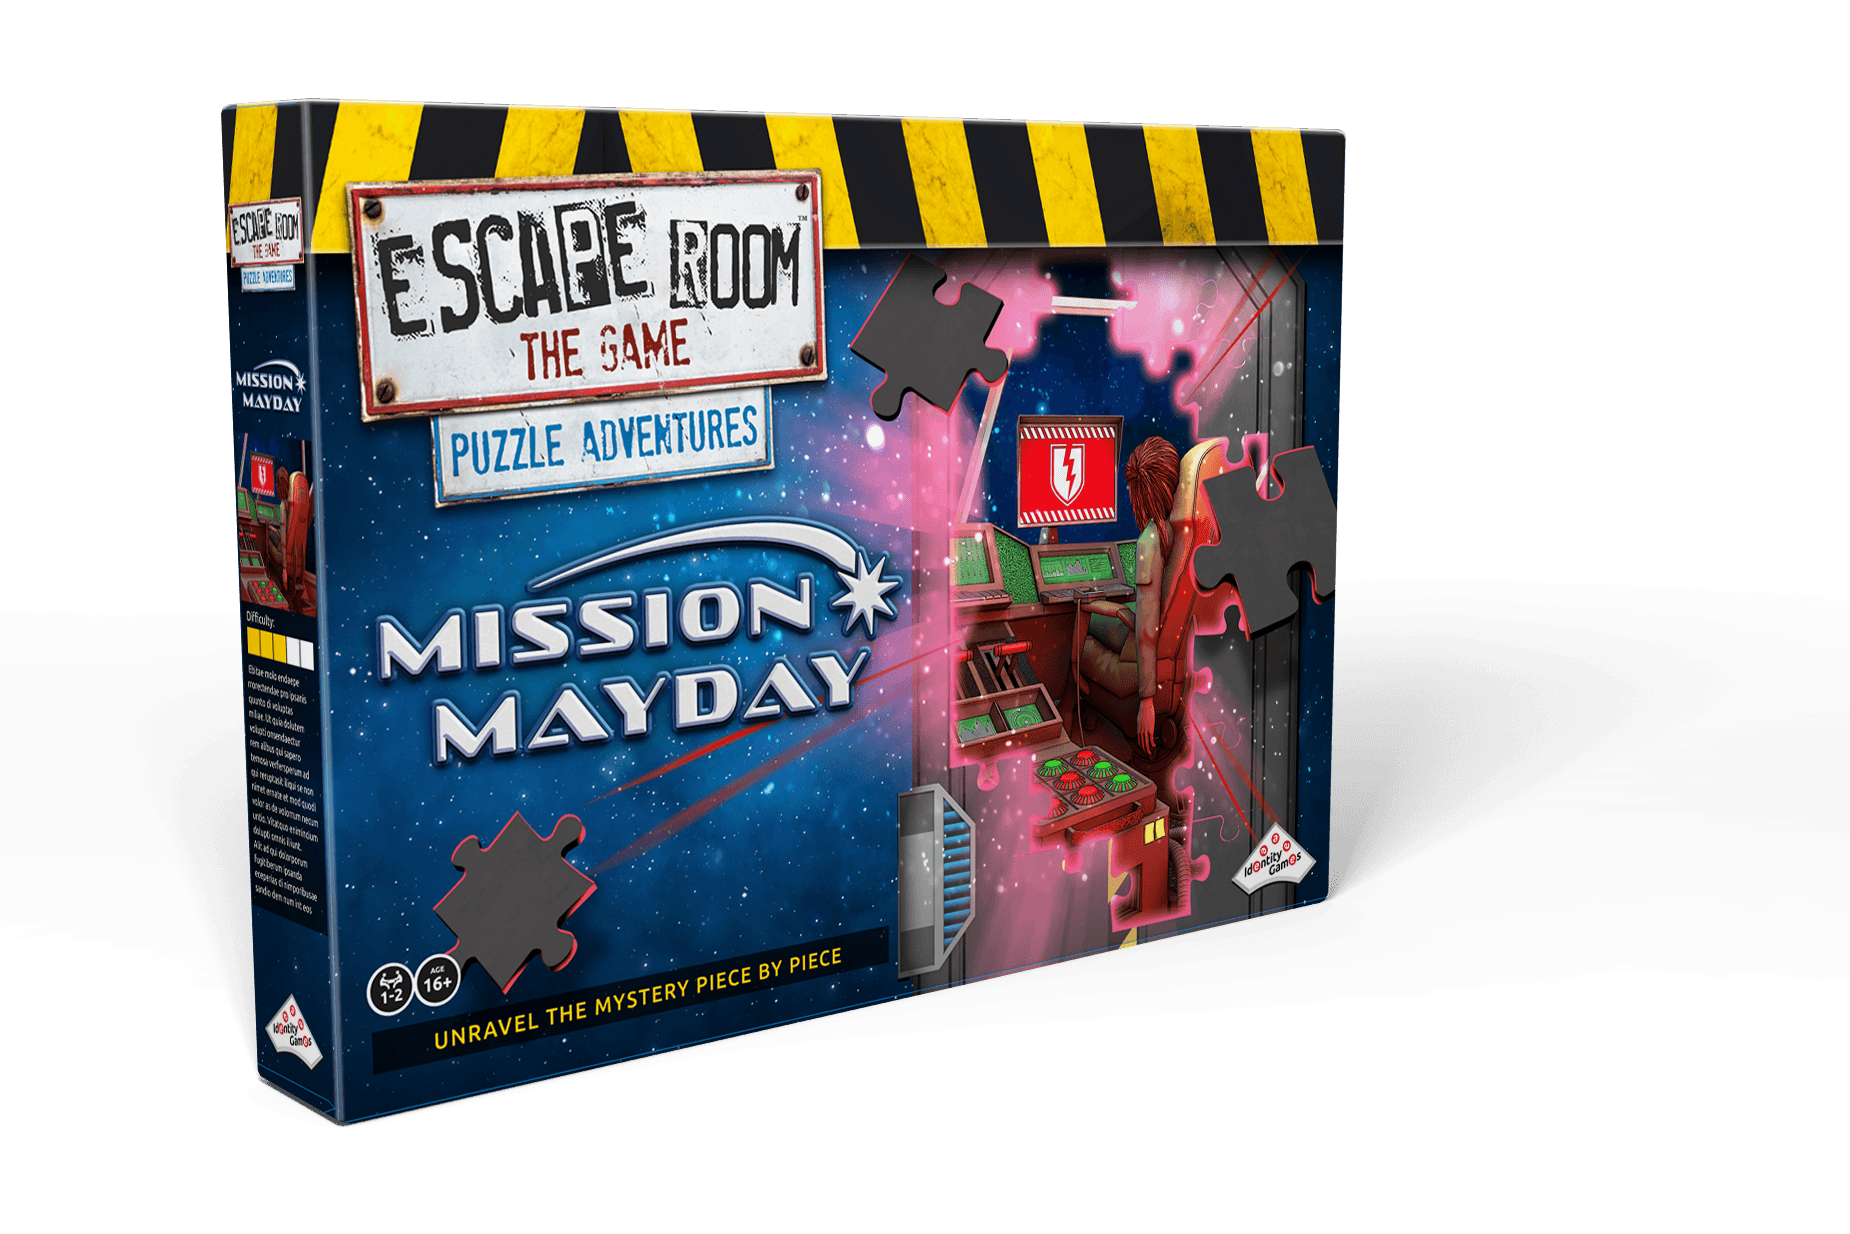 Puzzle Adventures - Mission Mayday